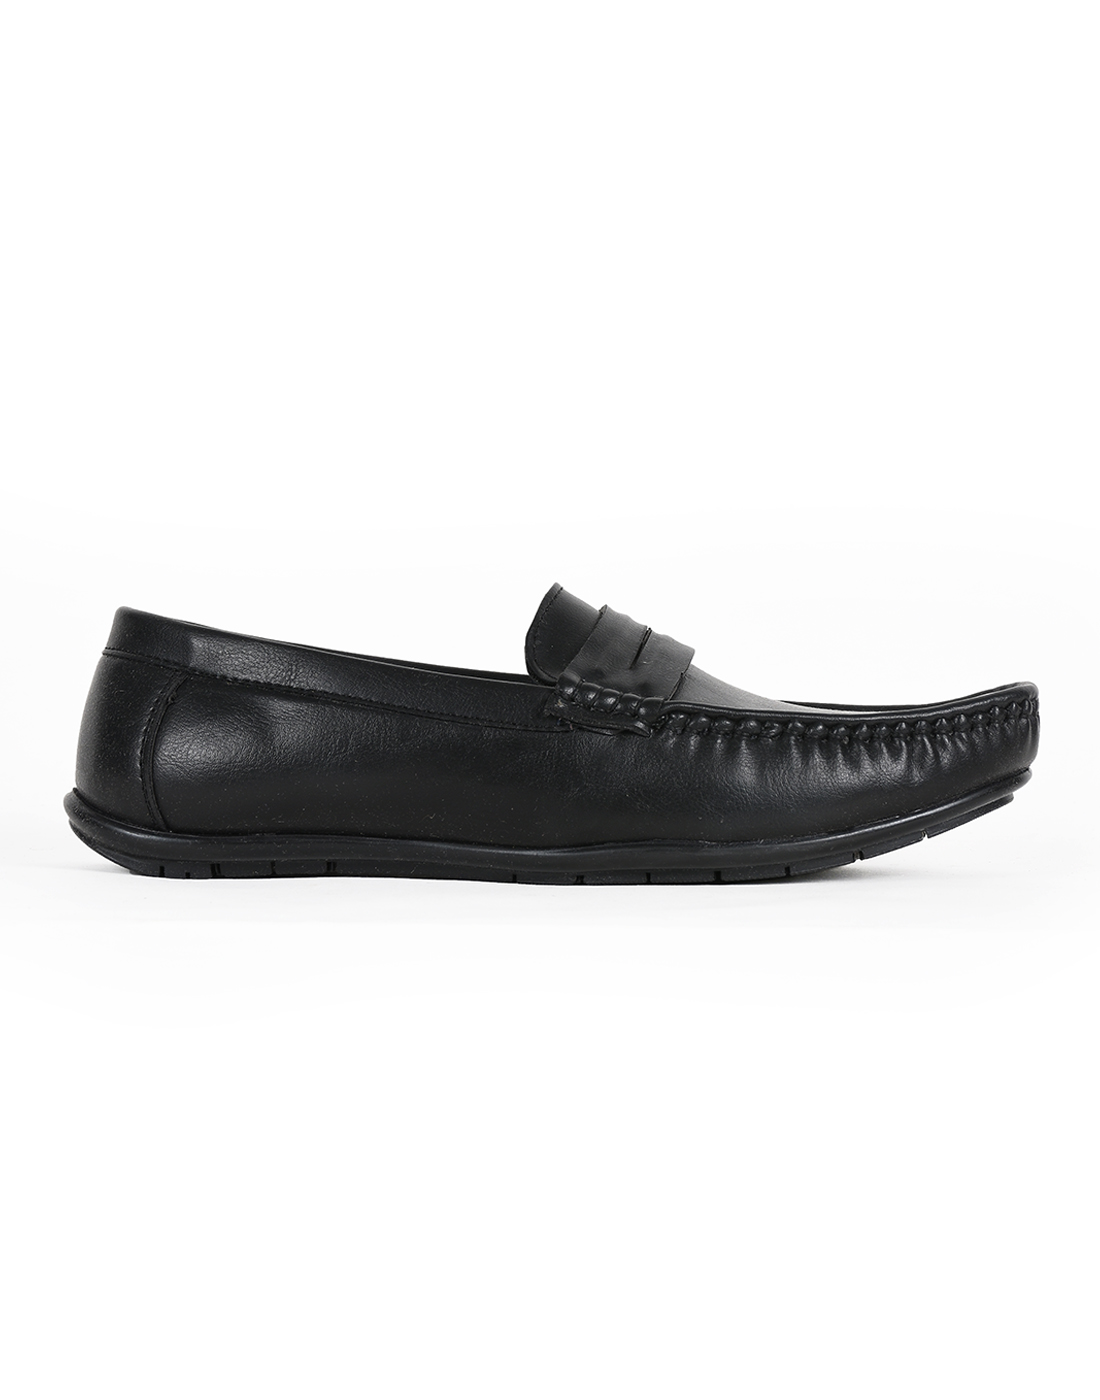 PARAGON Mens Solid Moccasins | Slip On Casual Wear Moccasin Shoes for Men